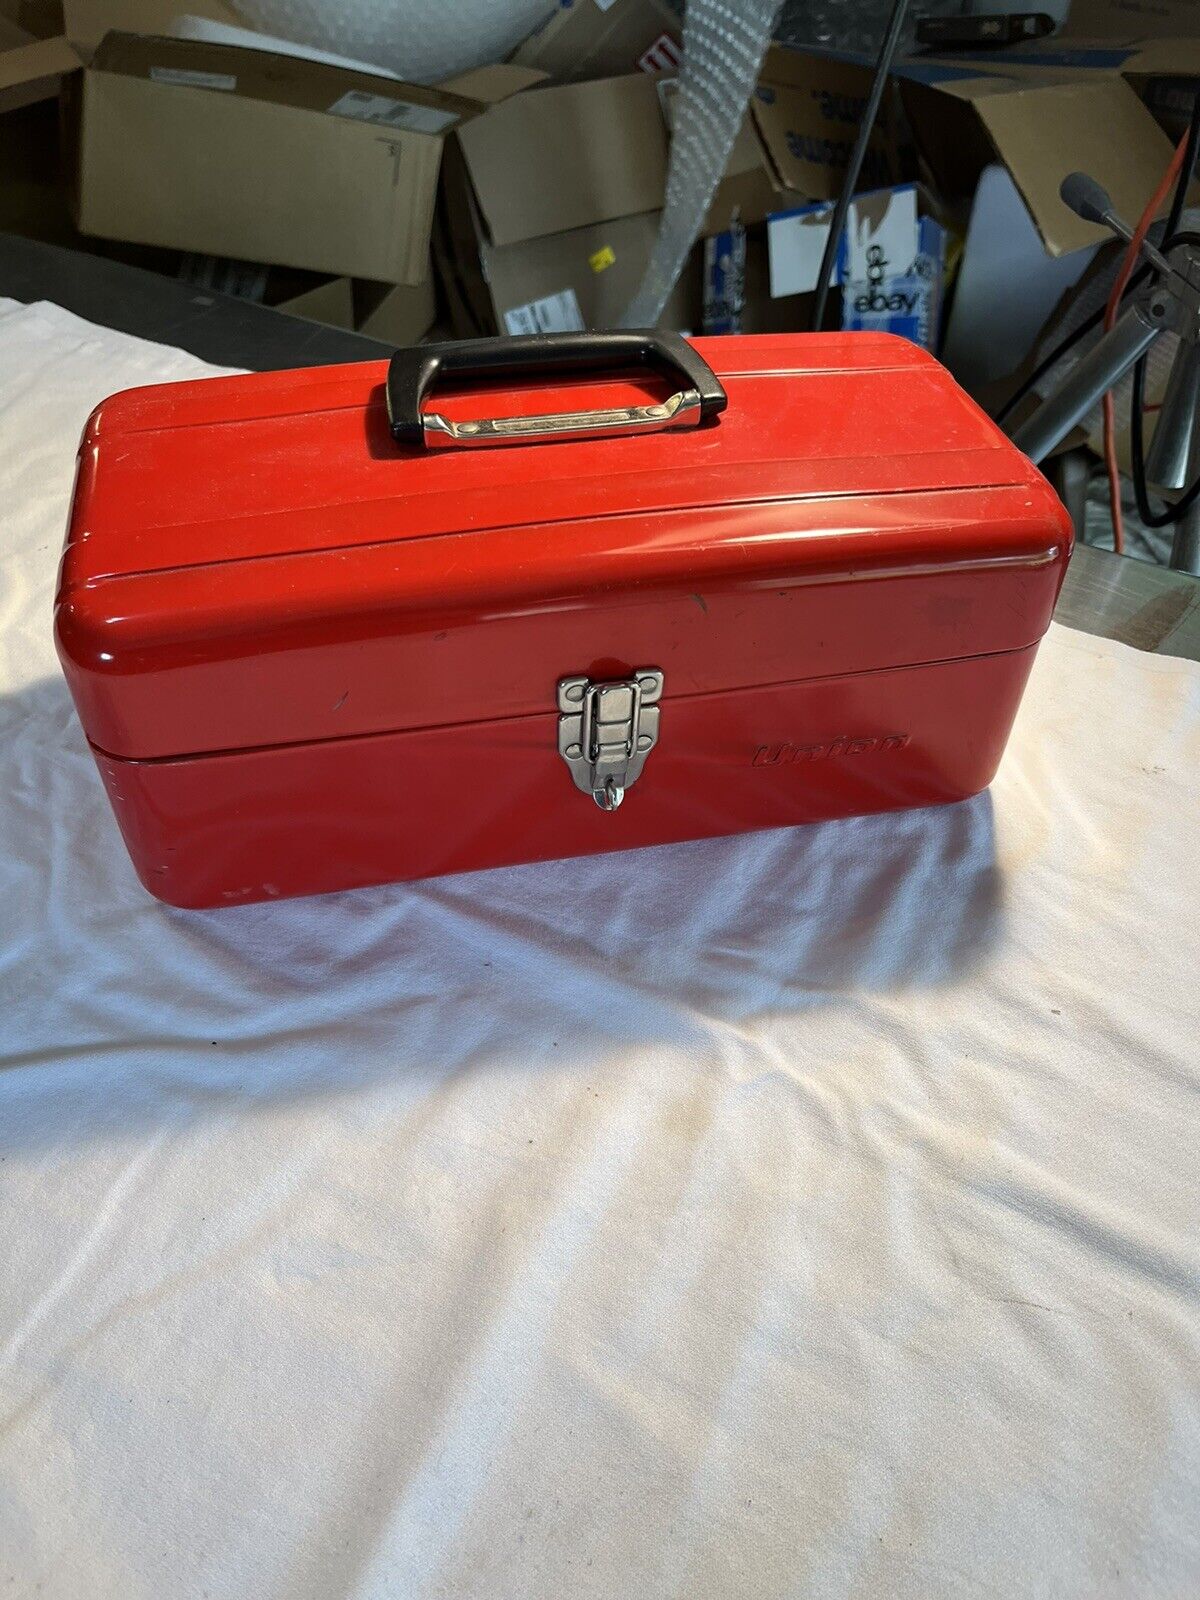 VINTAGE UNION STEEL METAL TACKLE TOOL BOX UTILITY CHEST FISHING GEAR Very Clean